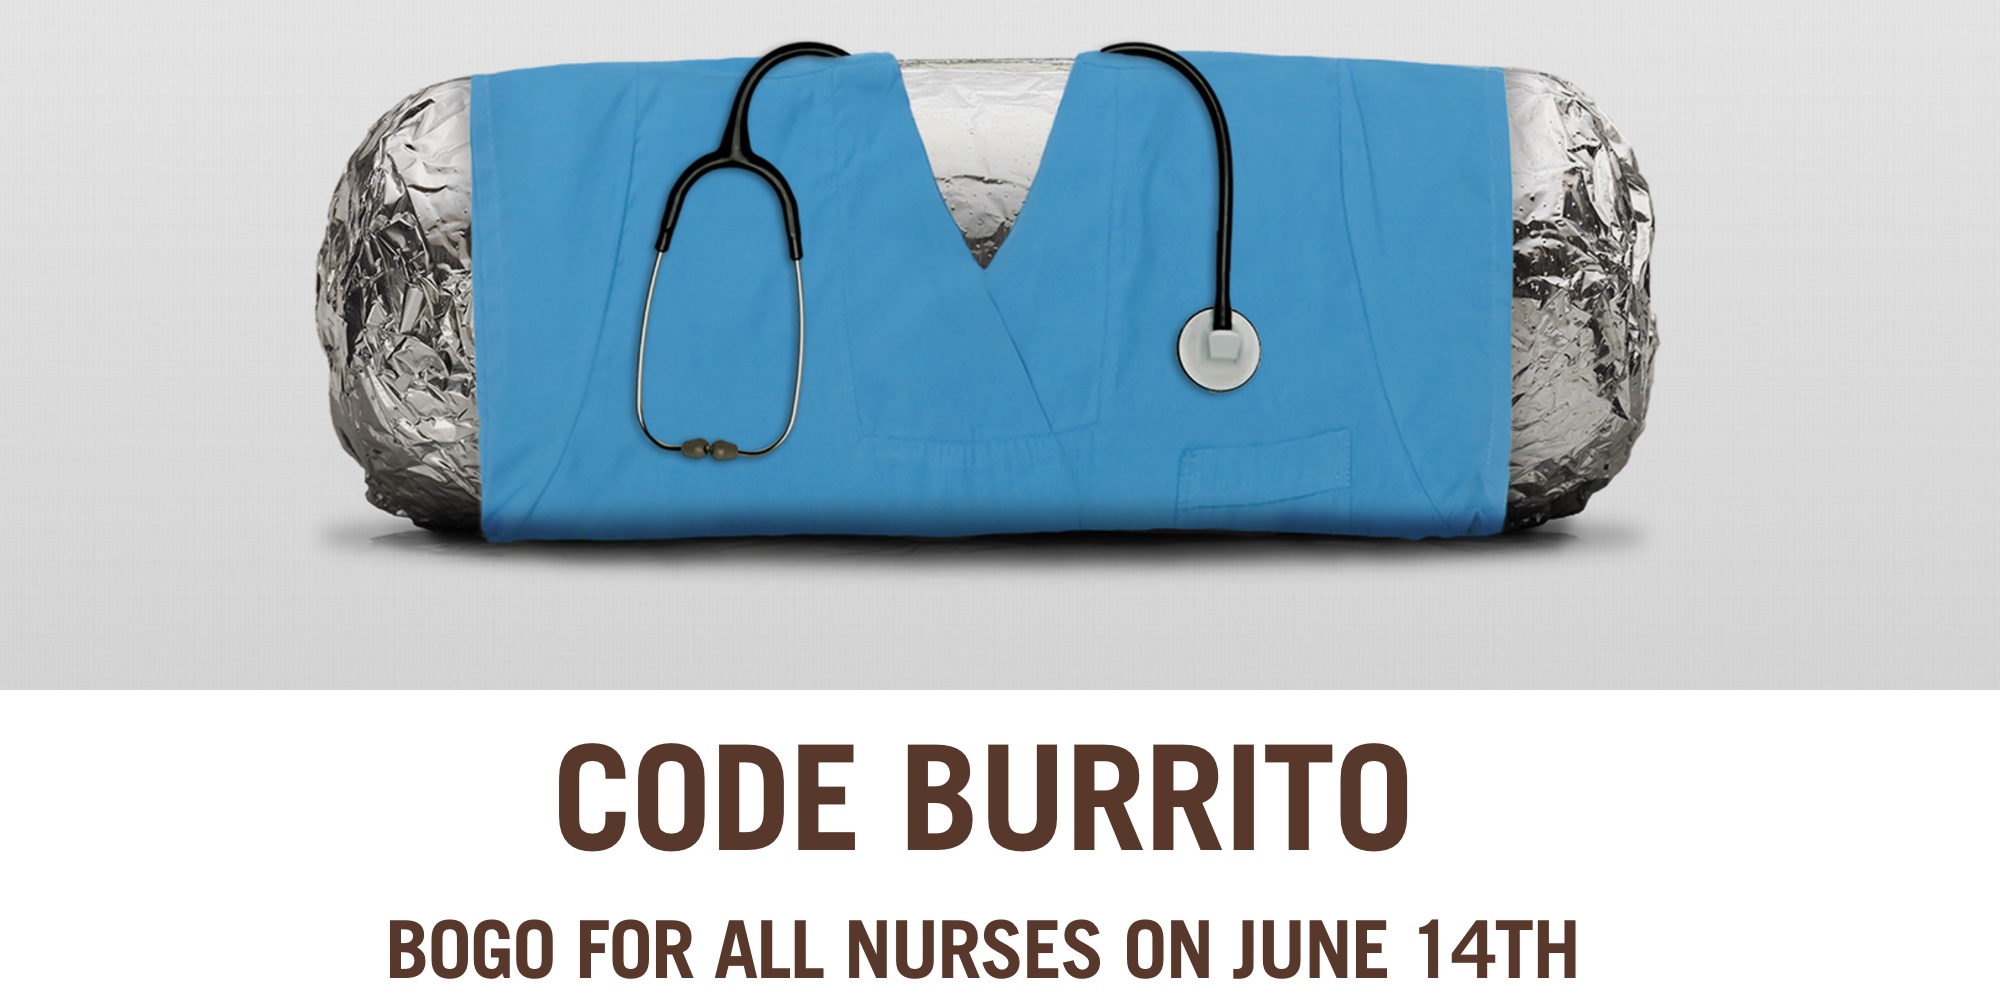 Chipotle offers BOGO free meals for nurses, today only